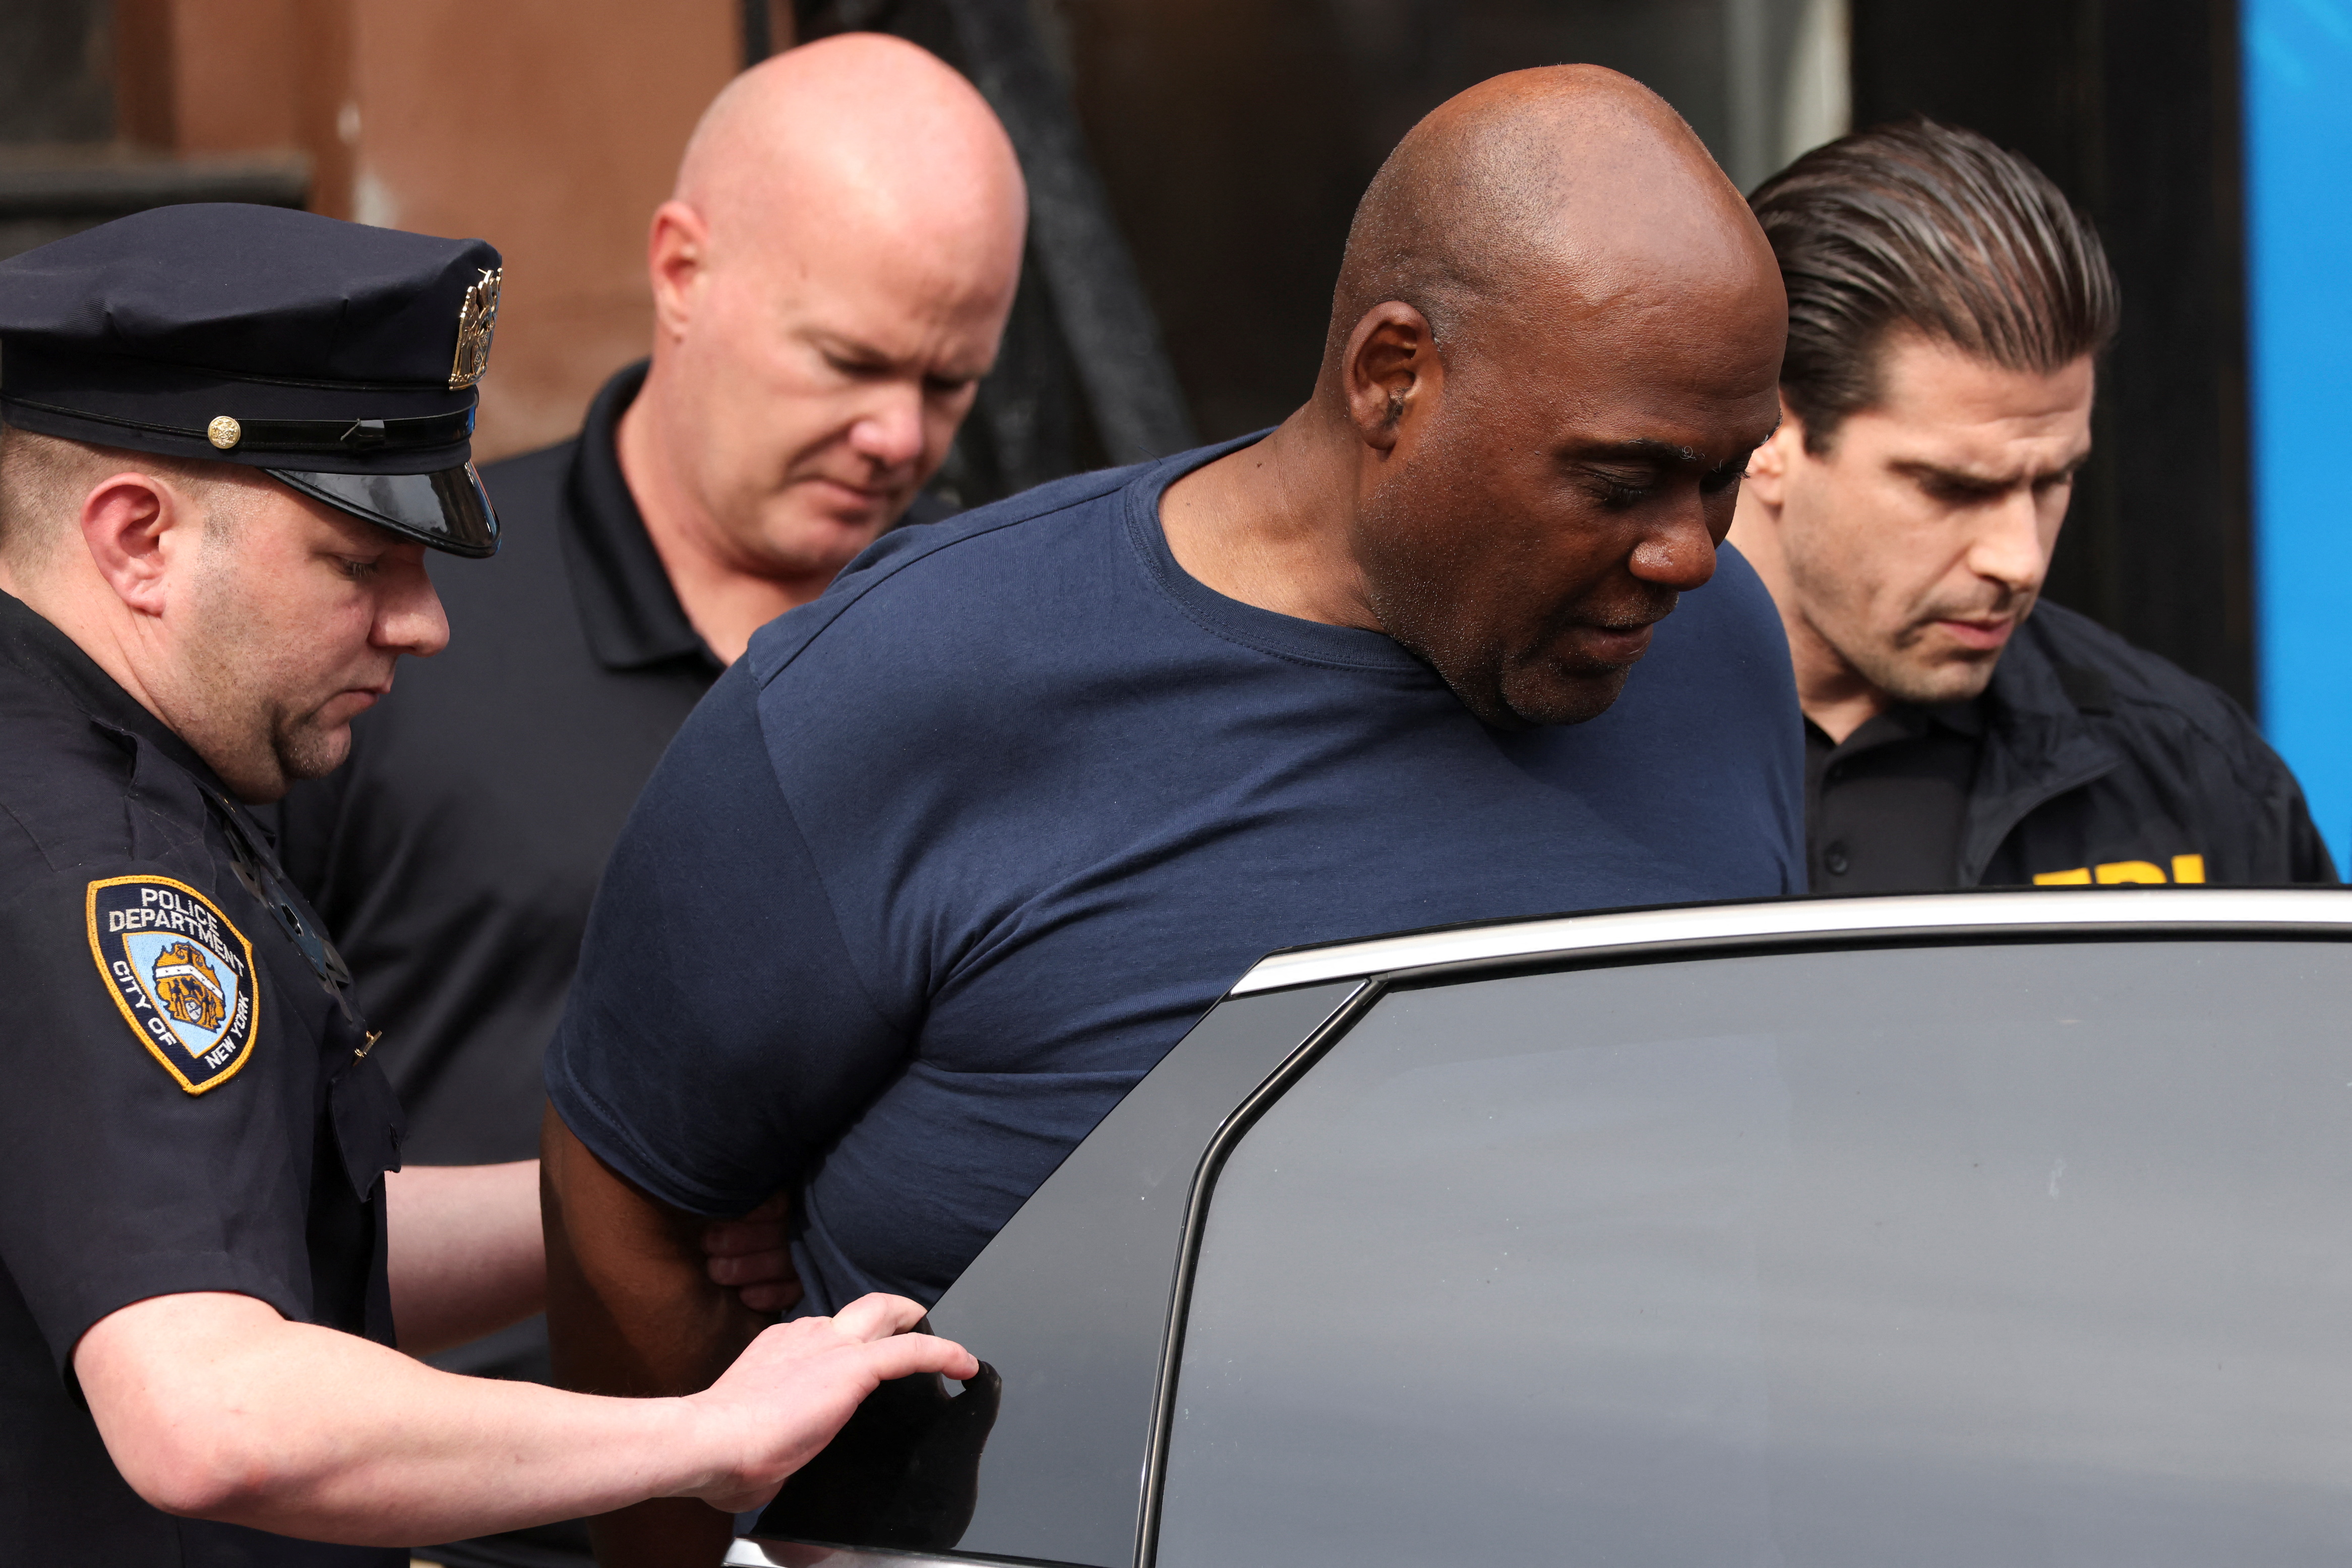 Frank James, the suspect in the Brooklyn subway shooting outside a police precinct in New York City